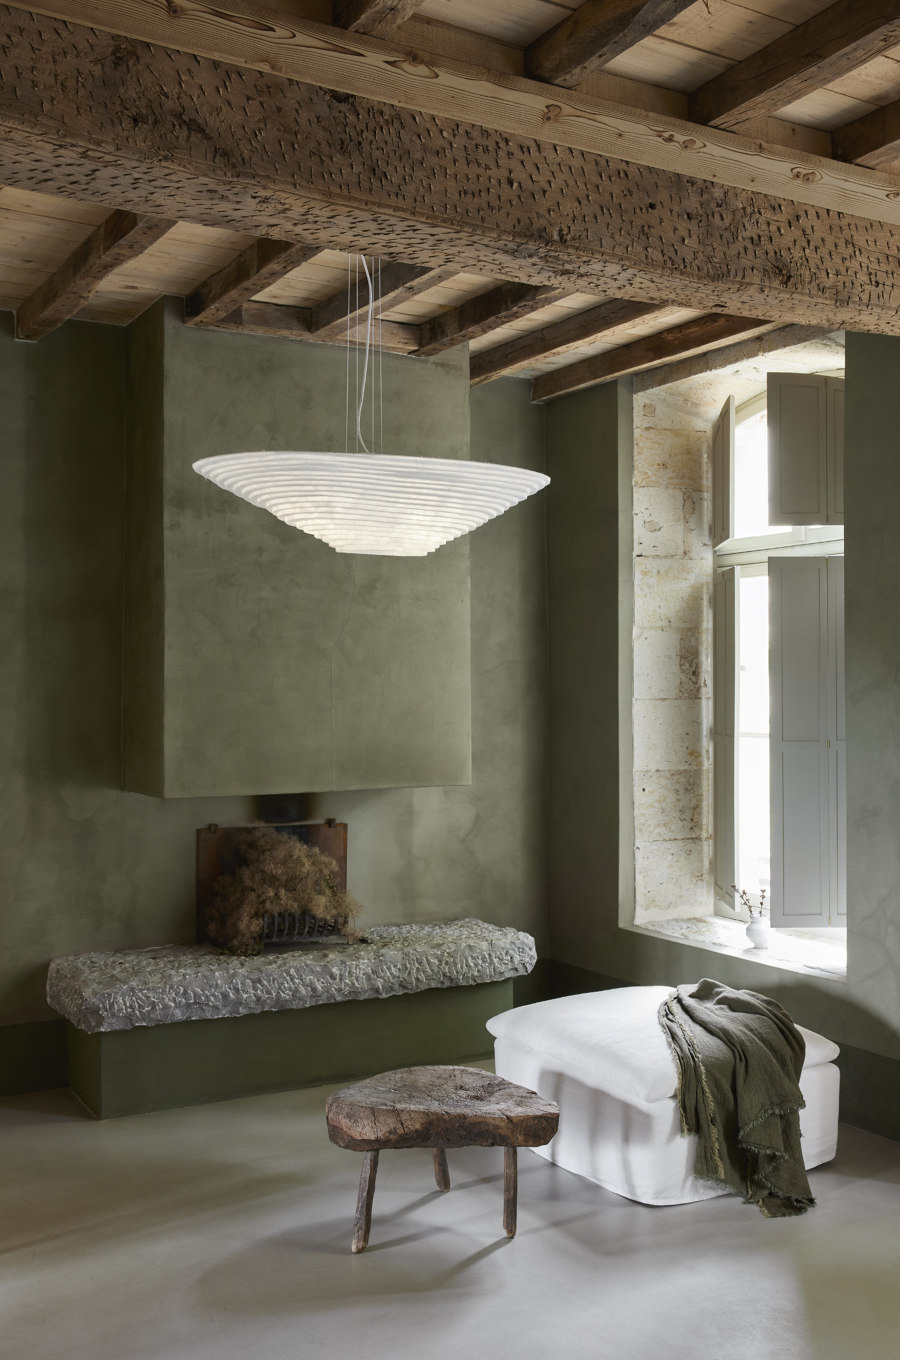 Nebulis by Forestier: new lighting from centuries-old materials | Novedades